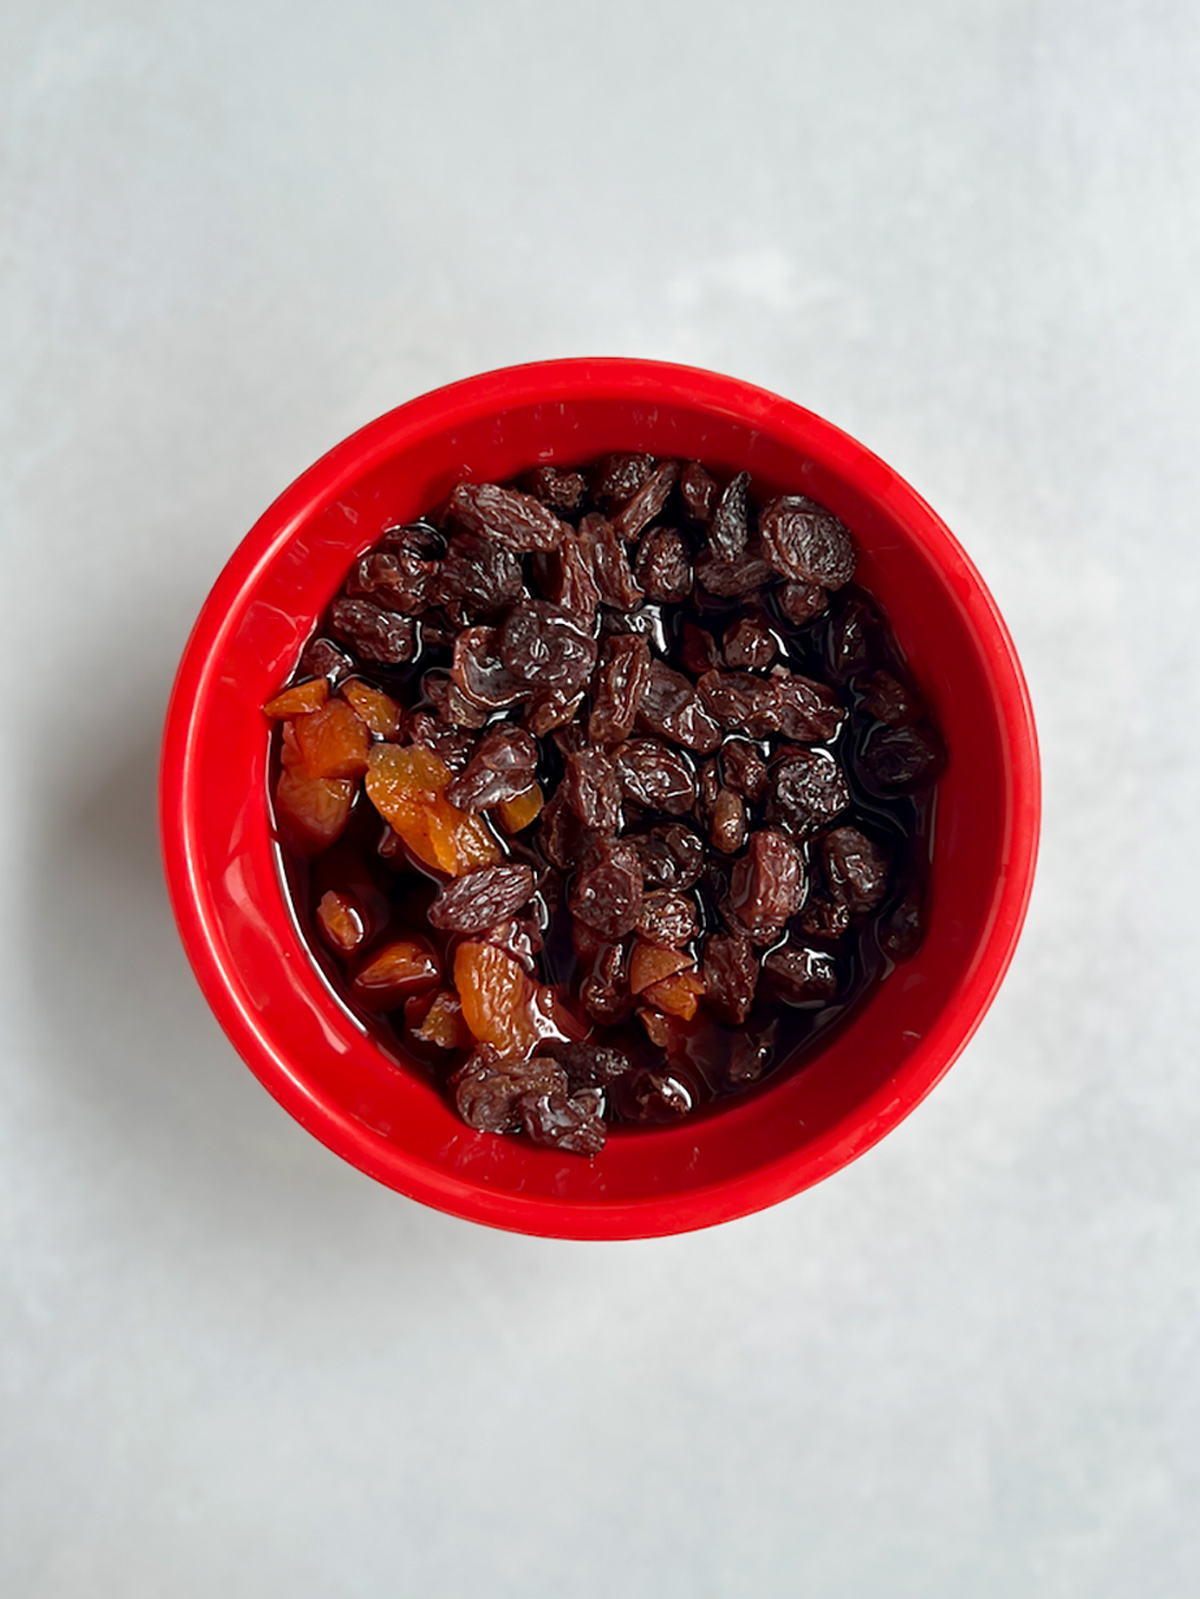 Raisins and apricots soaking in hot liquid in a red bowl.